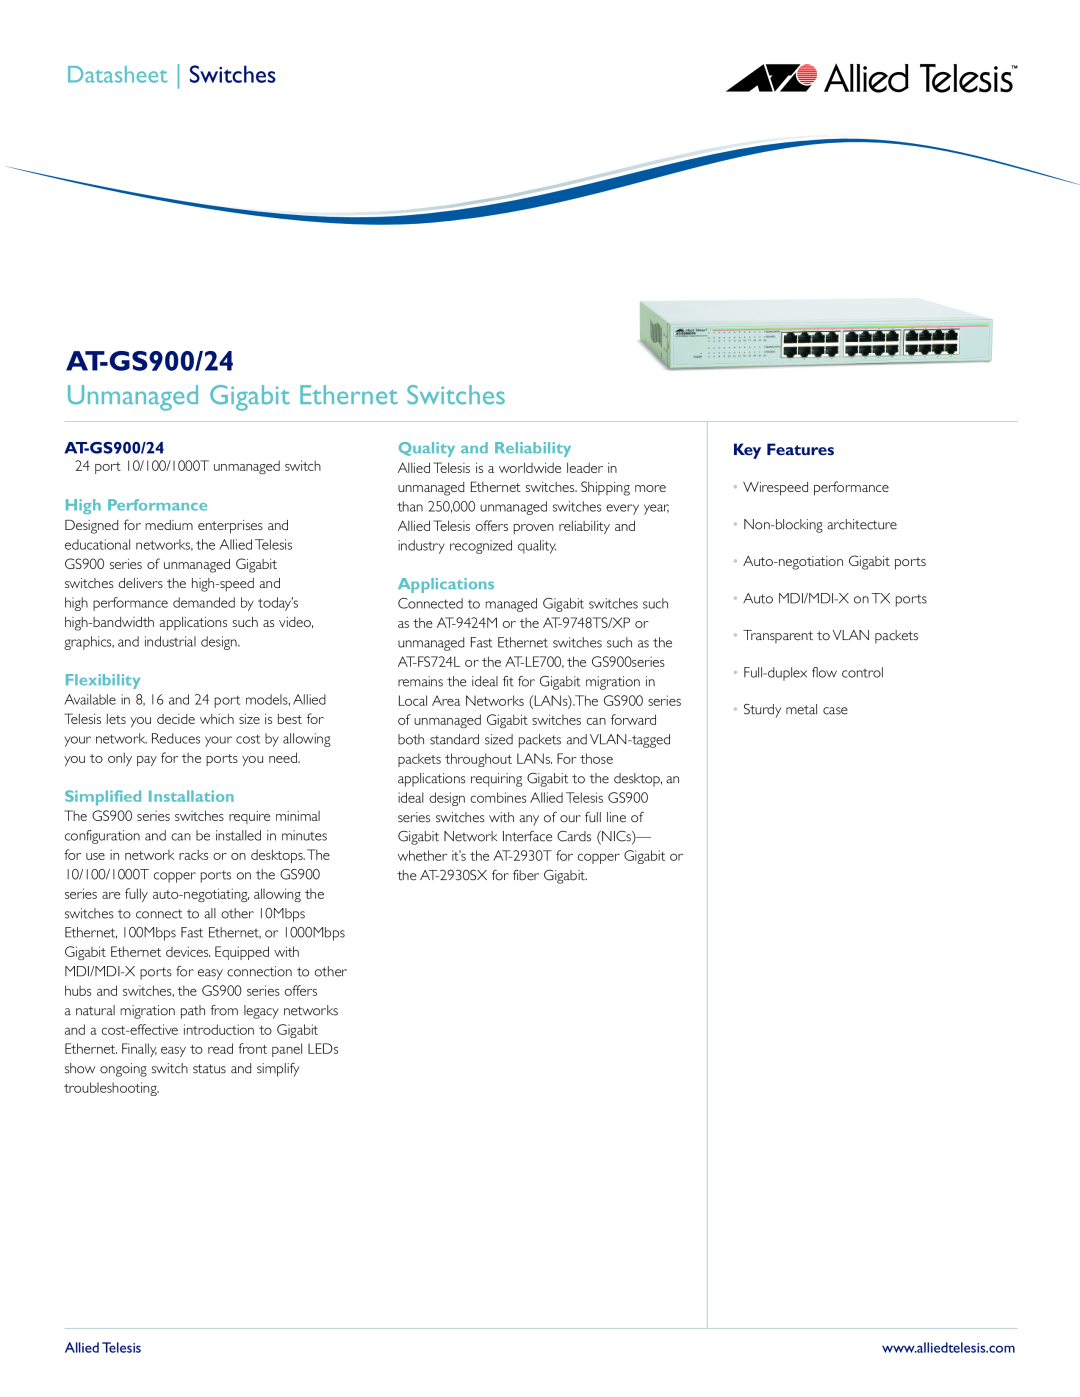 Allied Telesis AT-GS900/24 manual Unmanaged Gigabit Ethernet Switches, High Performance, Flexibility, Applications 